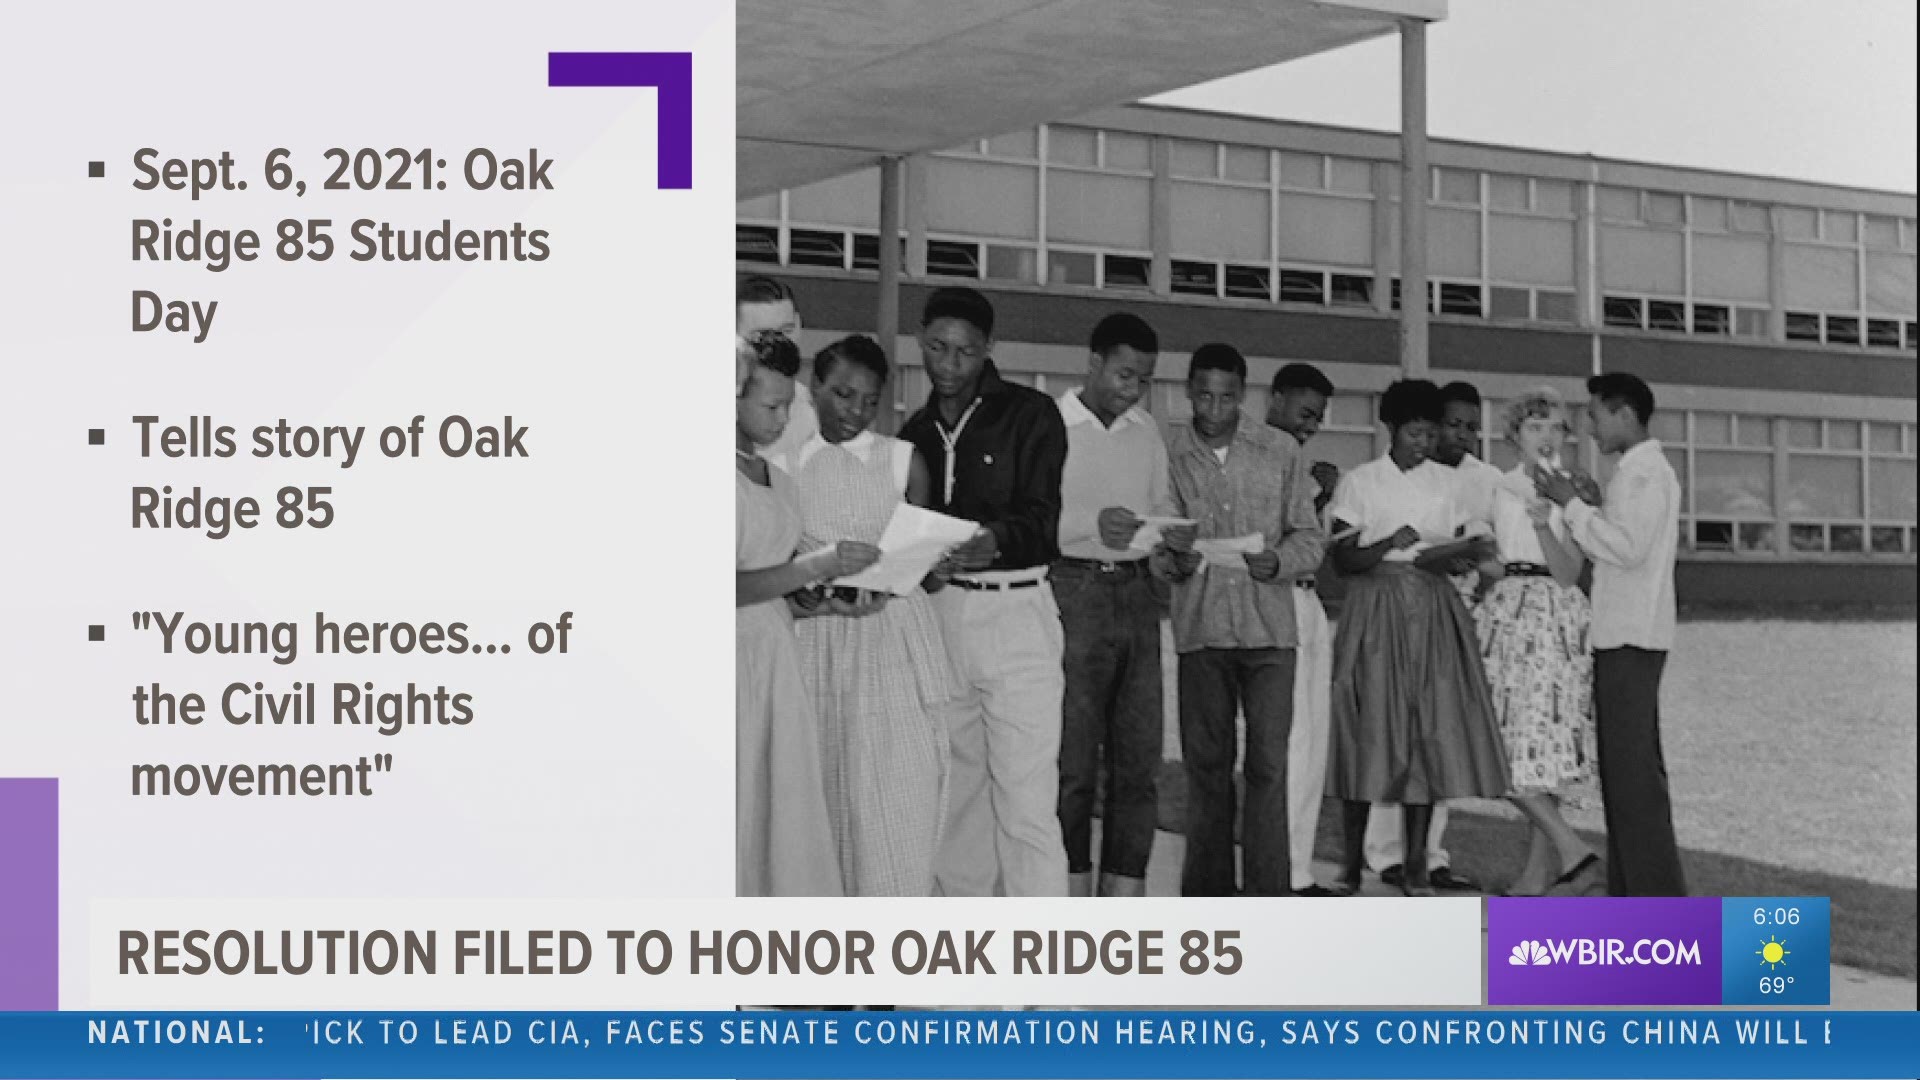 The Oak Ridge 85 were the first students to desegregate a public school system in Tennessee.